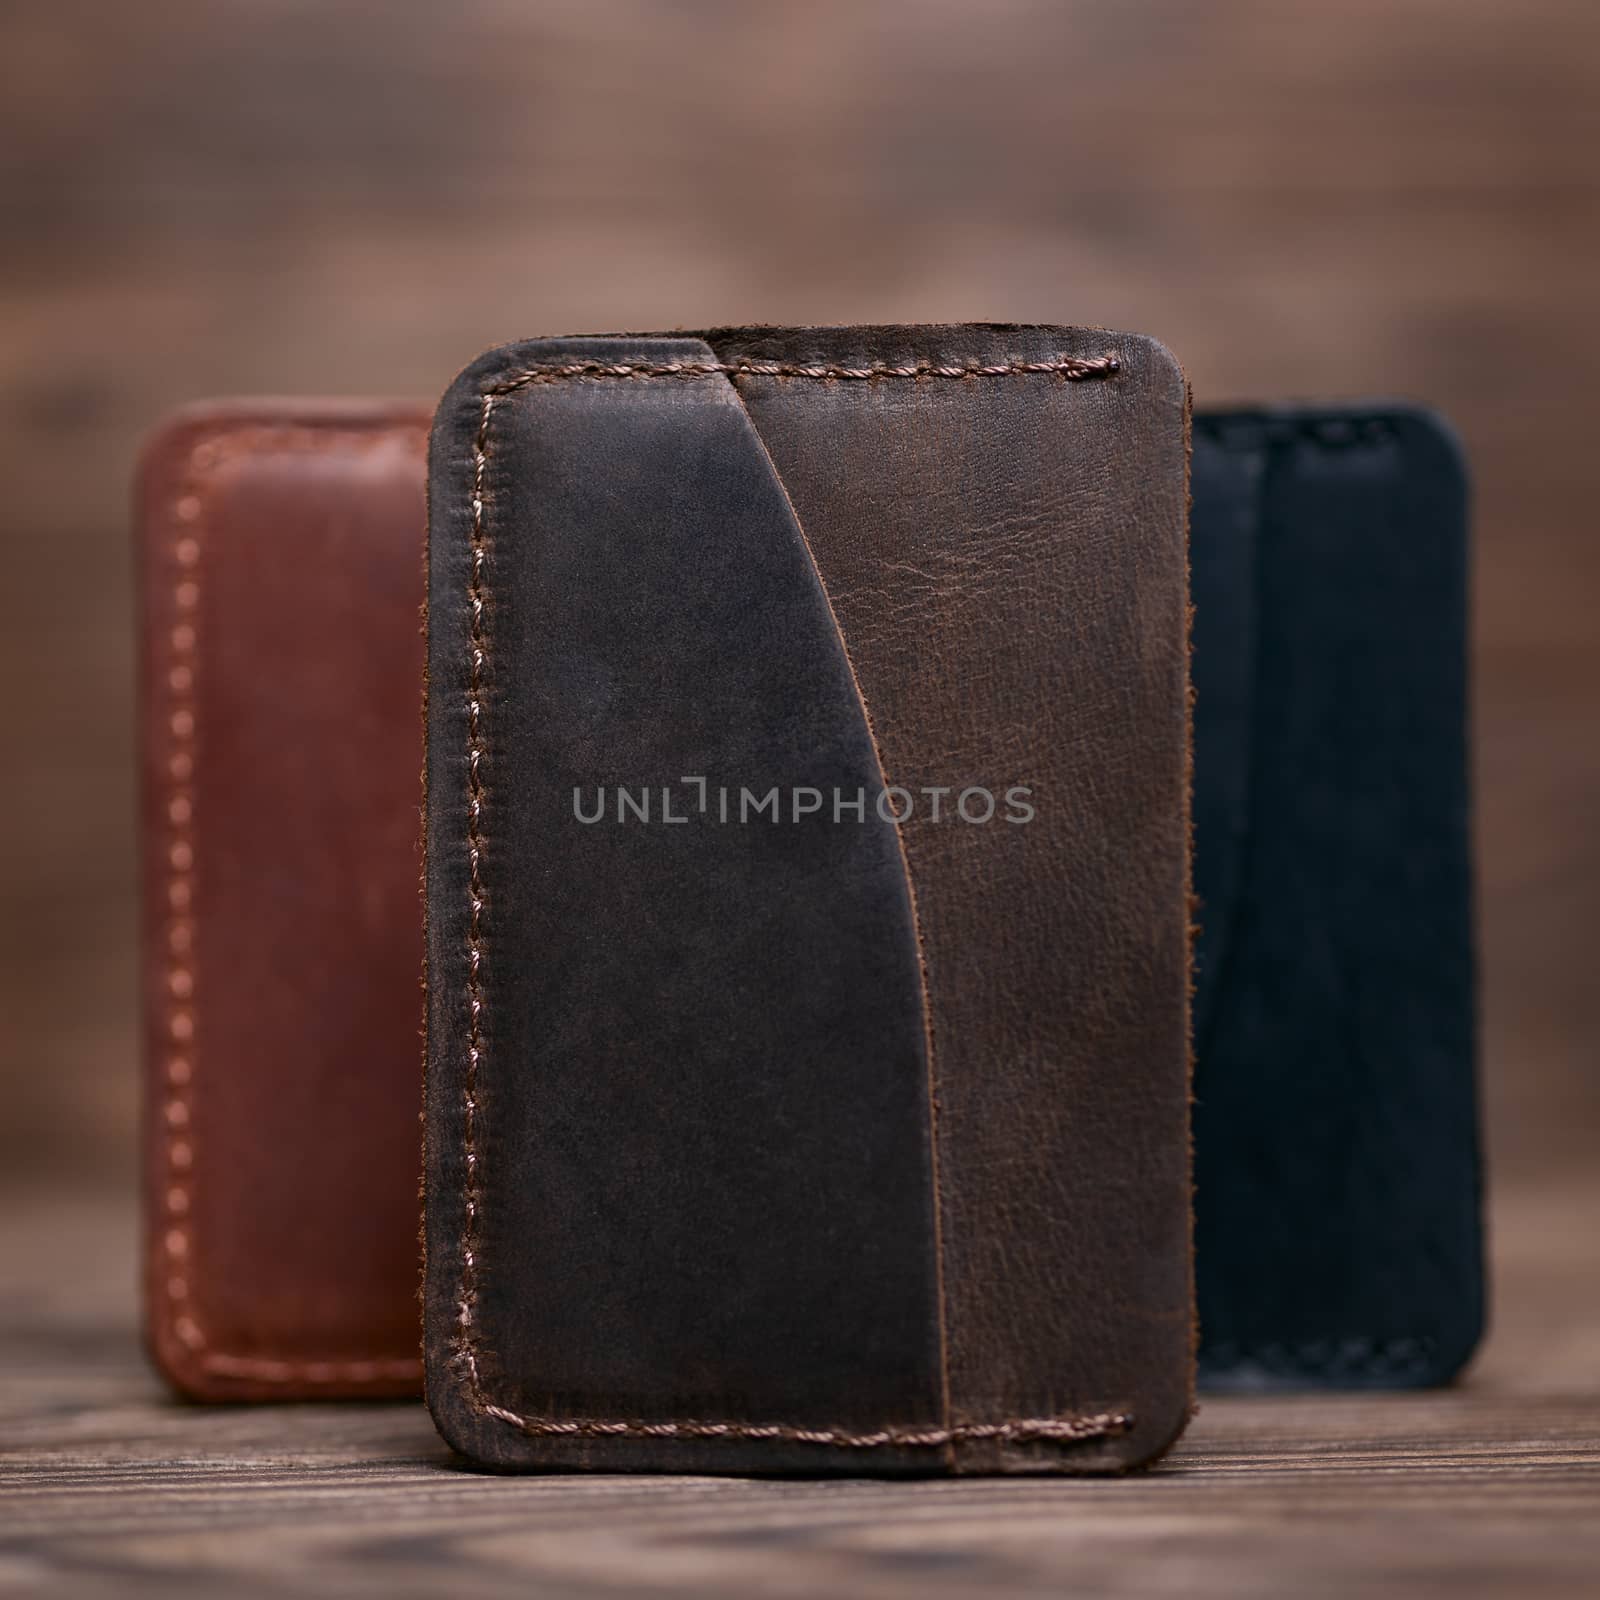 One pocket brown leather handmade cardholder. On blurred background stay other colour cardholders. Stock photo on blurred background.